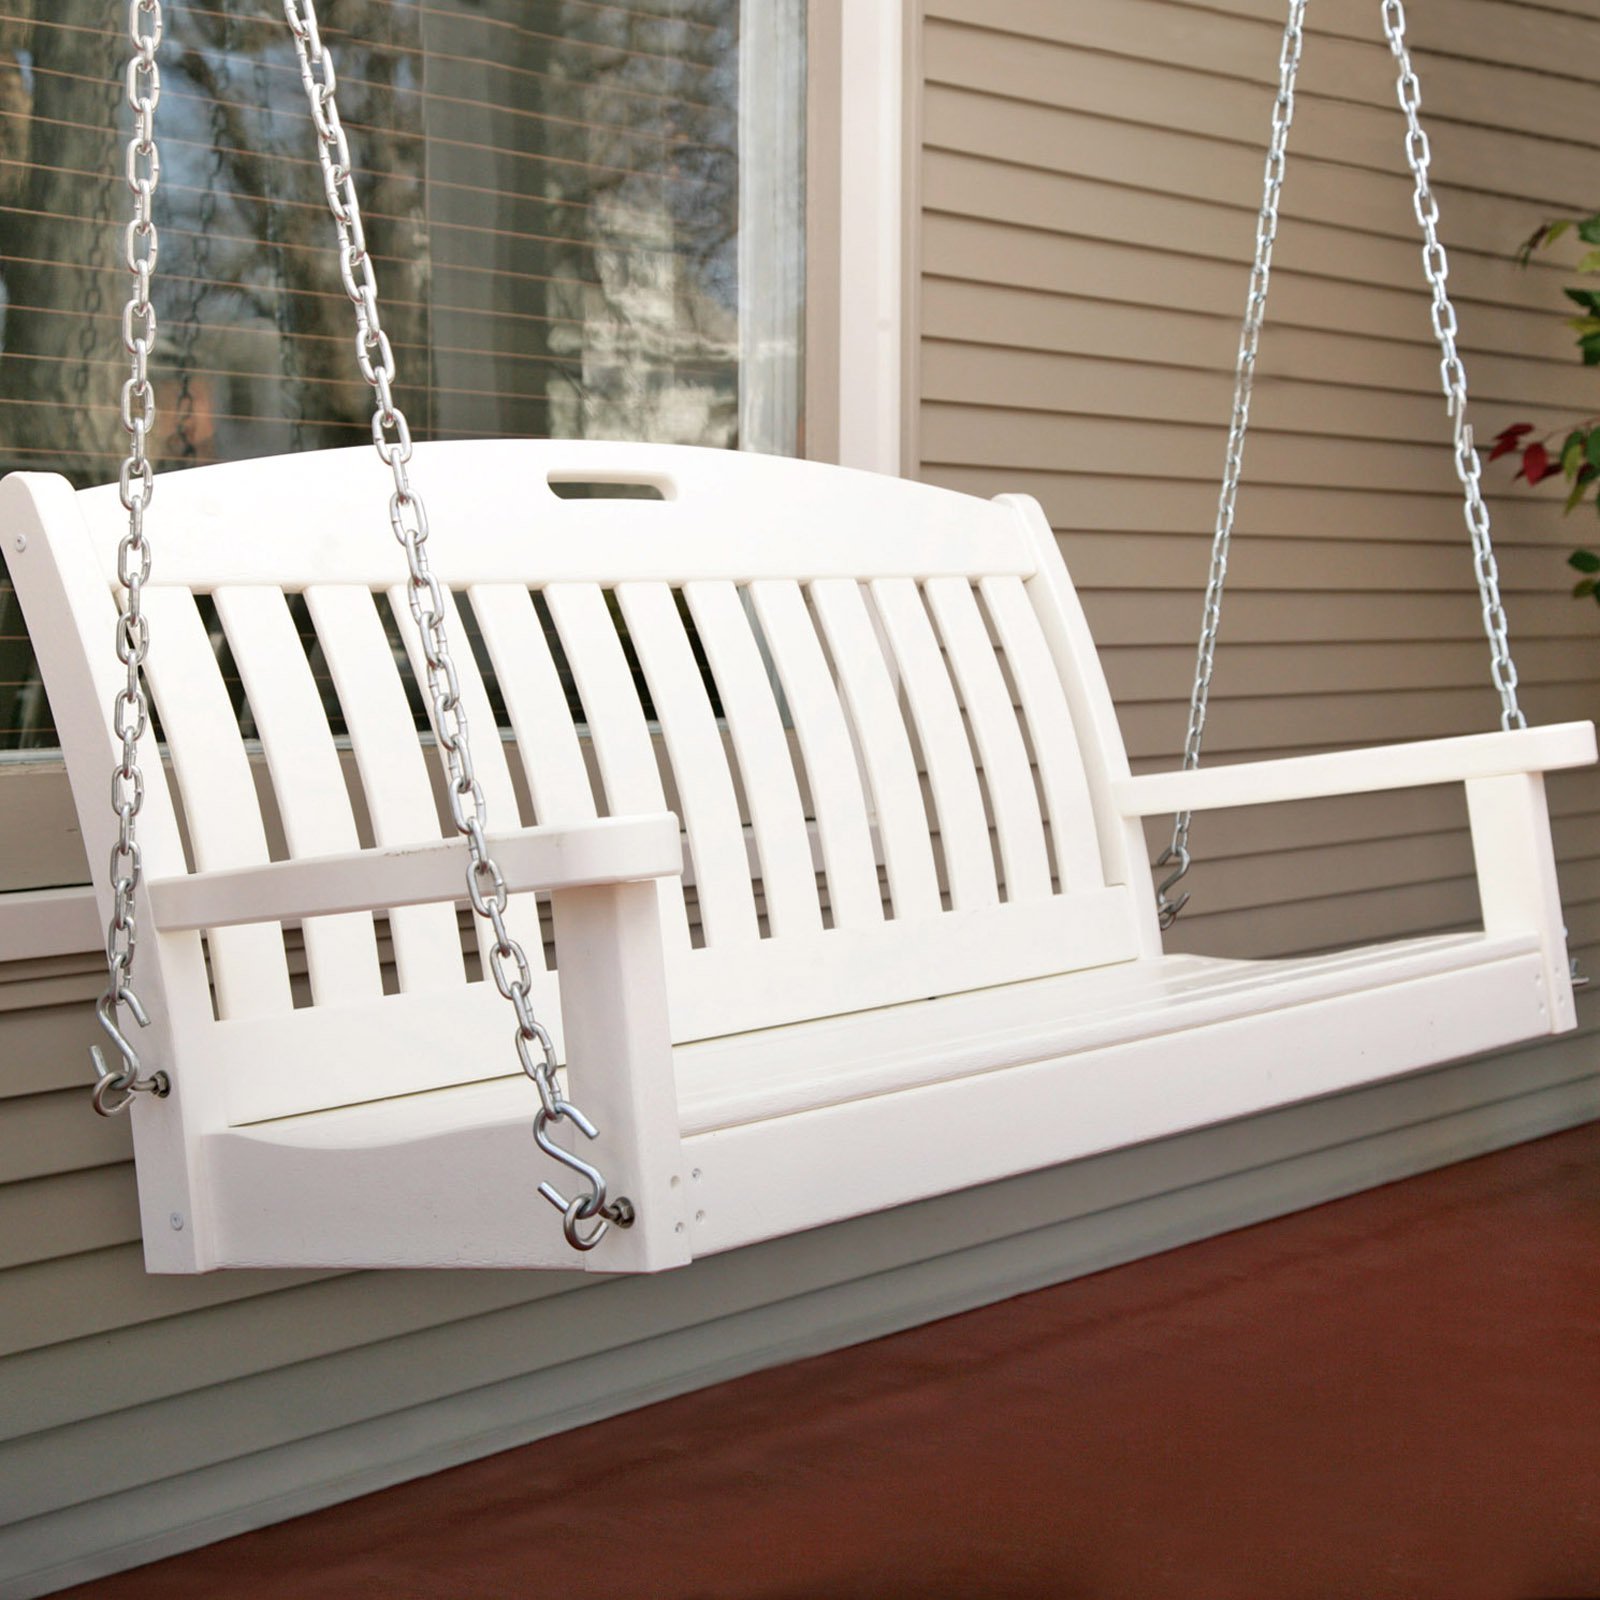 A Picturesque Front Porch Swing Installation - San Diego Pro Hadyman